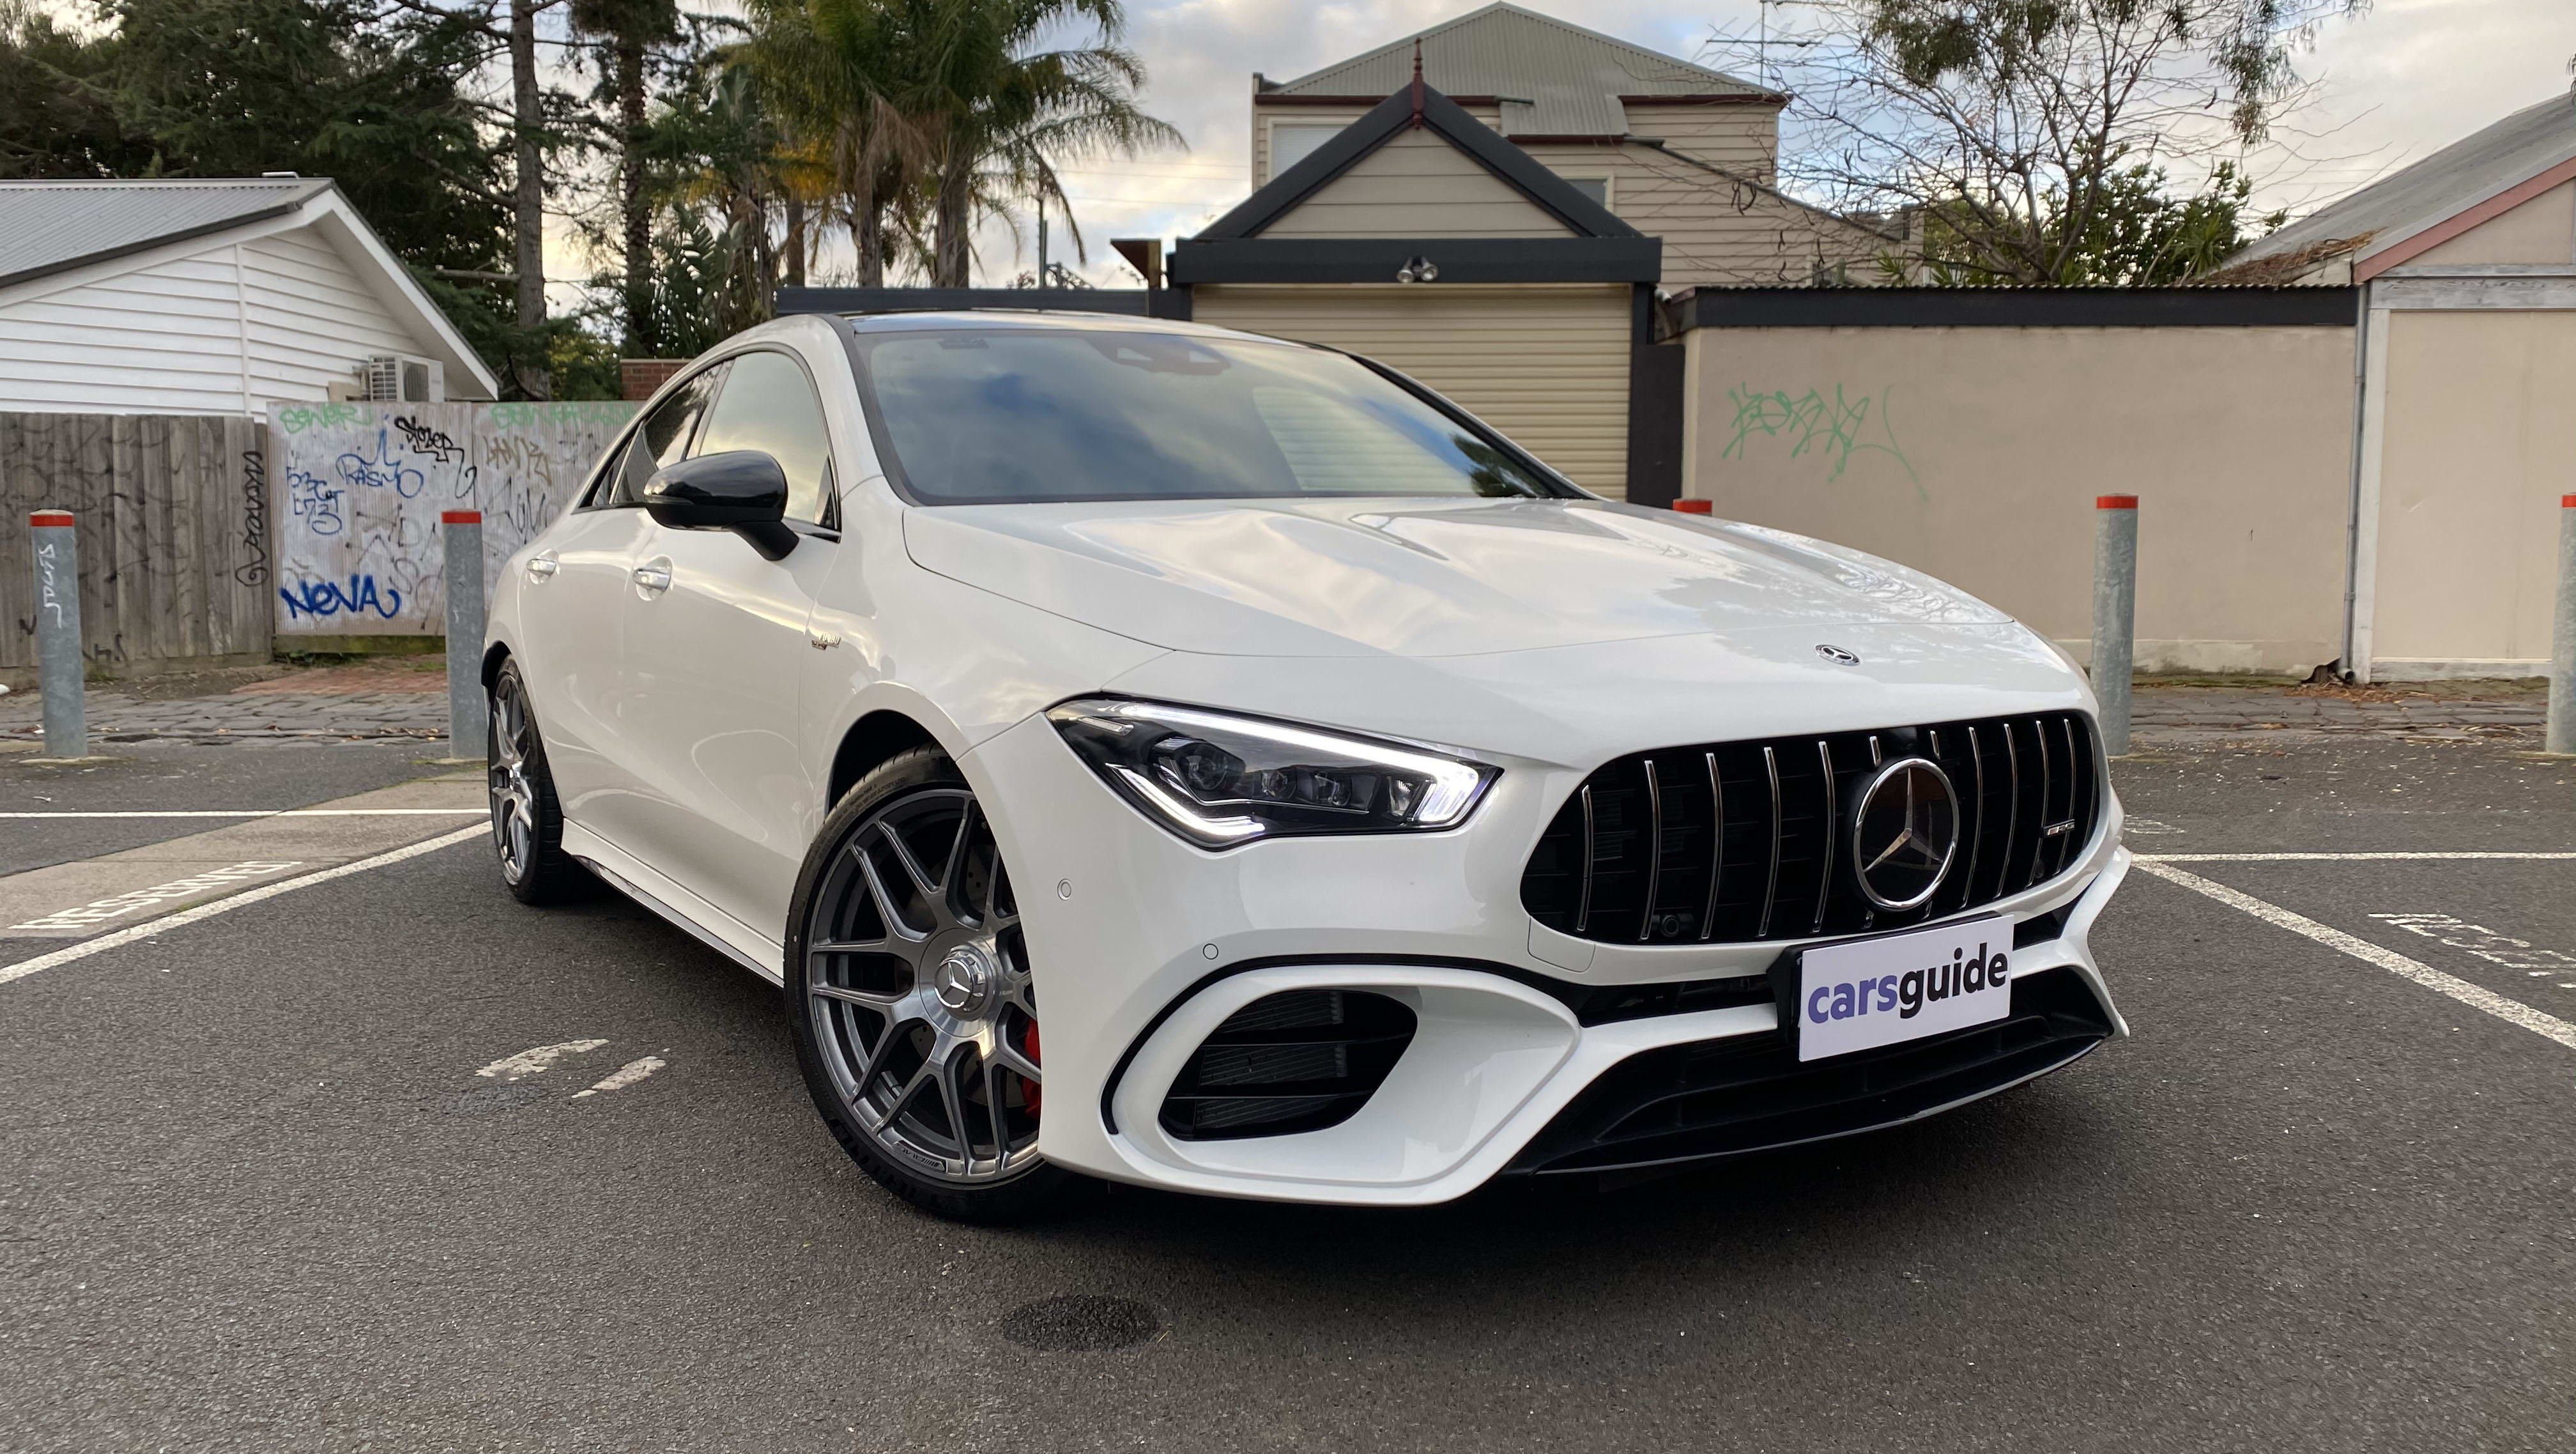 Cla 45 S Amg 0 100 Mercedes-AMG CLA 45 S 2020 review | CarsGuide